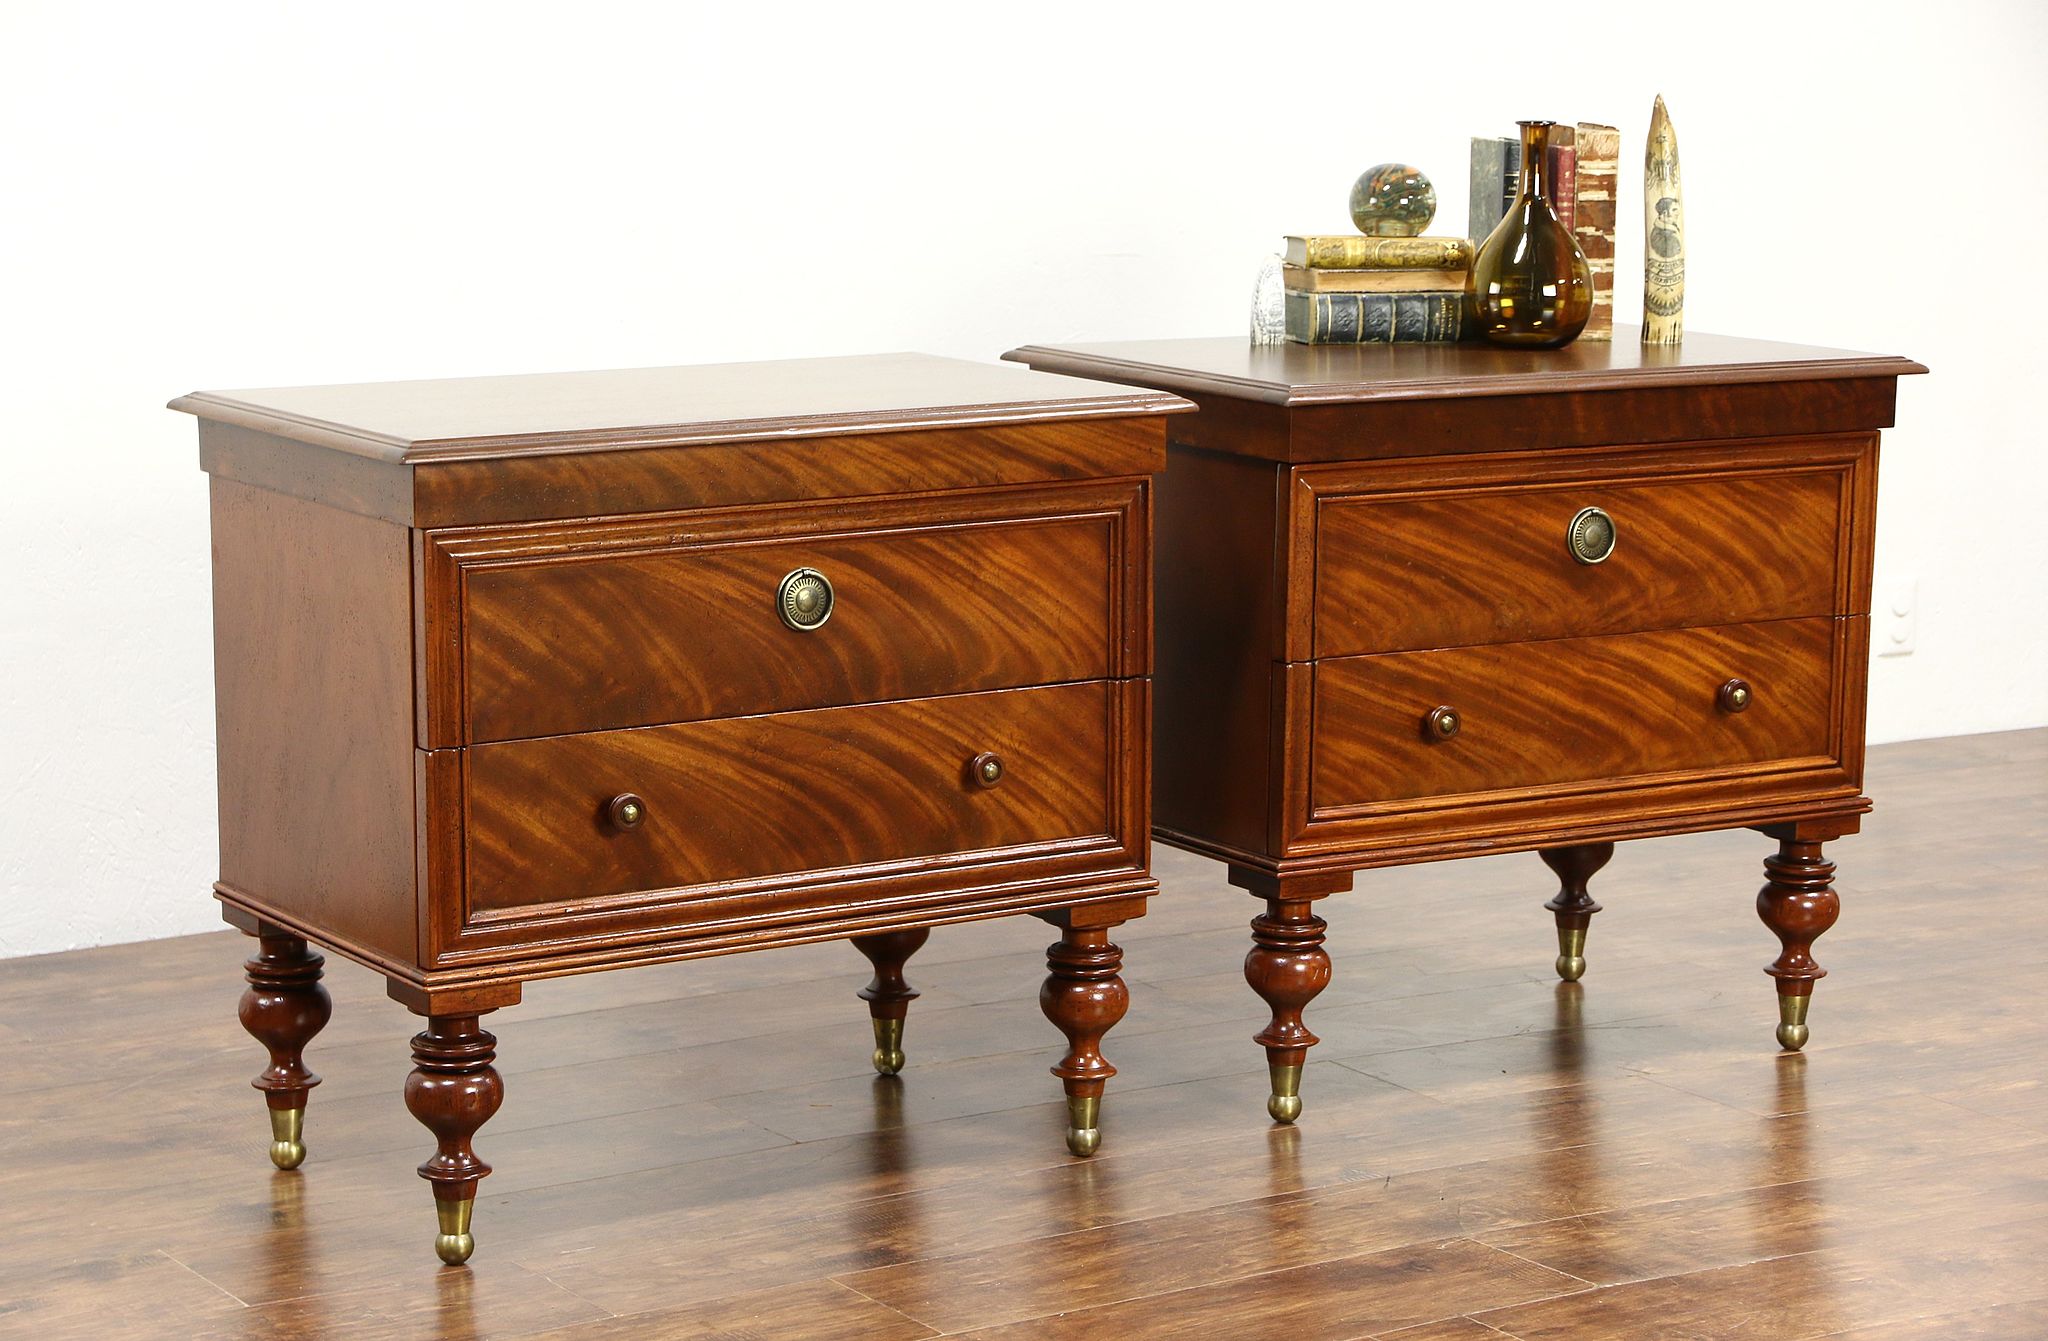 Sold Pair Of End Tables Or Nightstands Milling Road By Baker